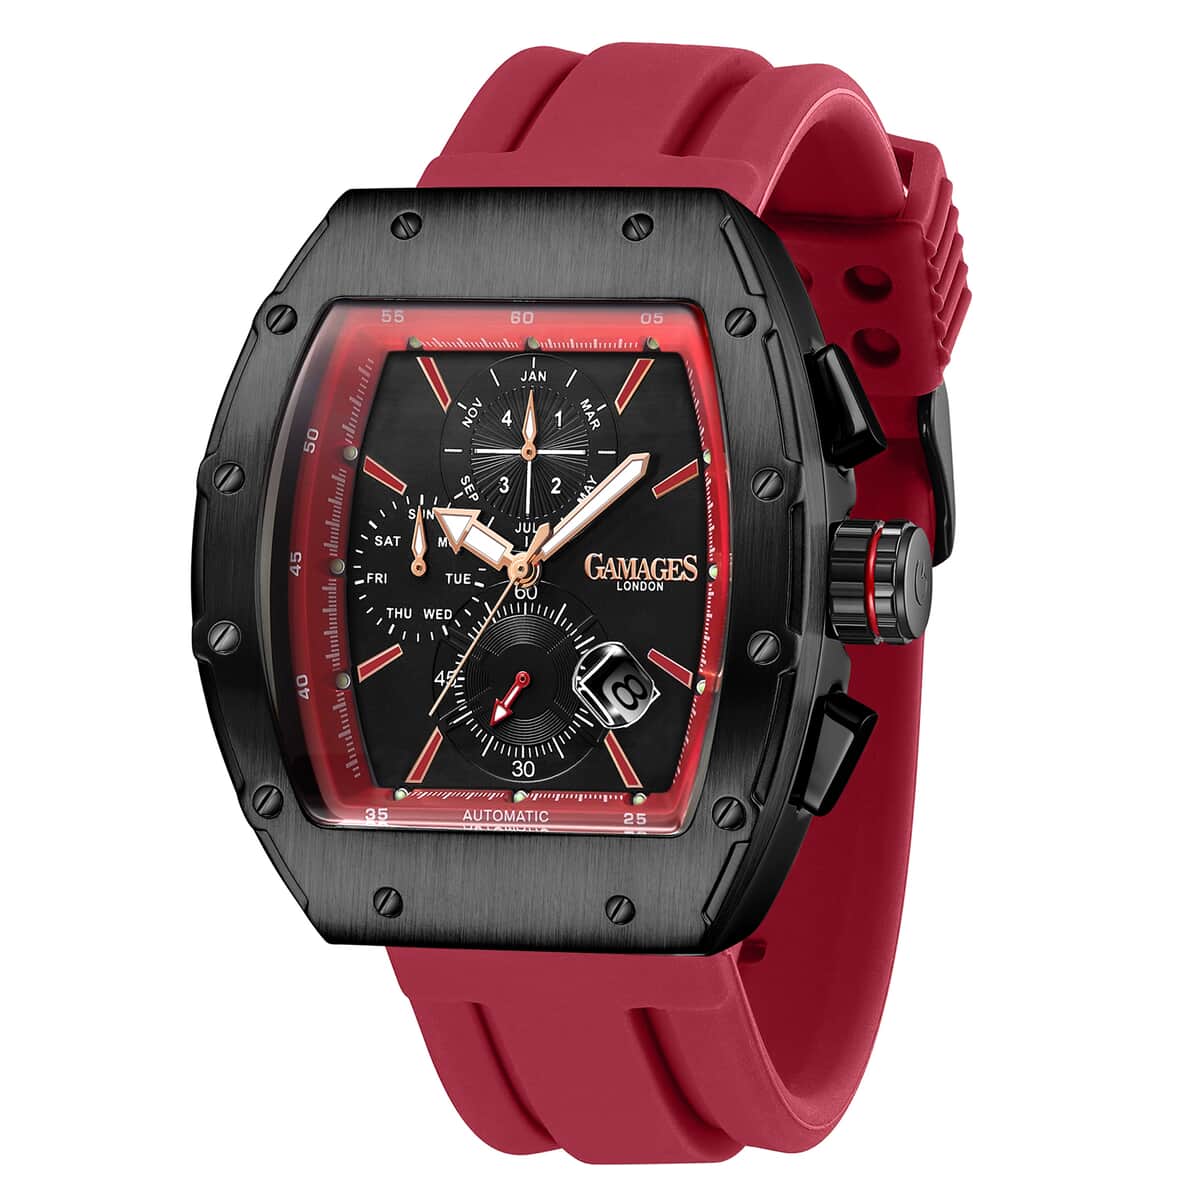 GAMAGES OF LONDON Limited Edition Hand Assembled Icon Automatic Movement Red Silicone Strap Watch in ION Plated Black (43mm) FREE GIFT PEN image number 2